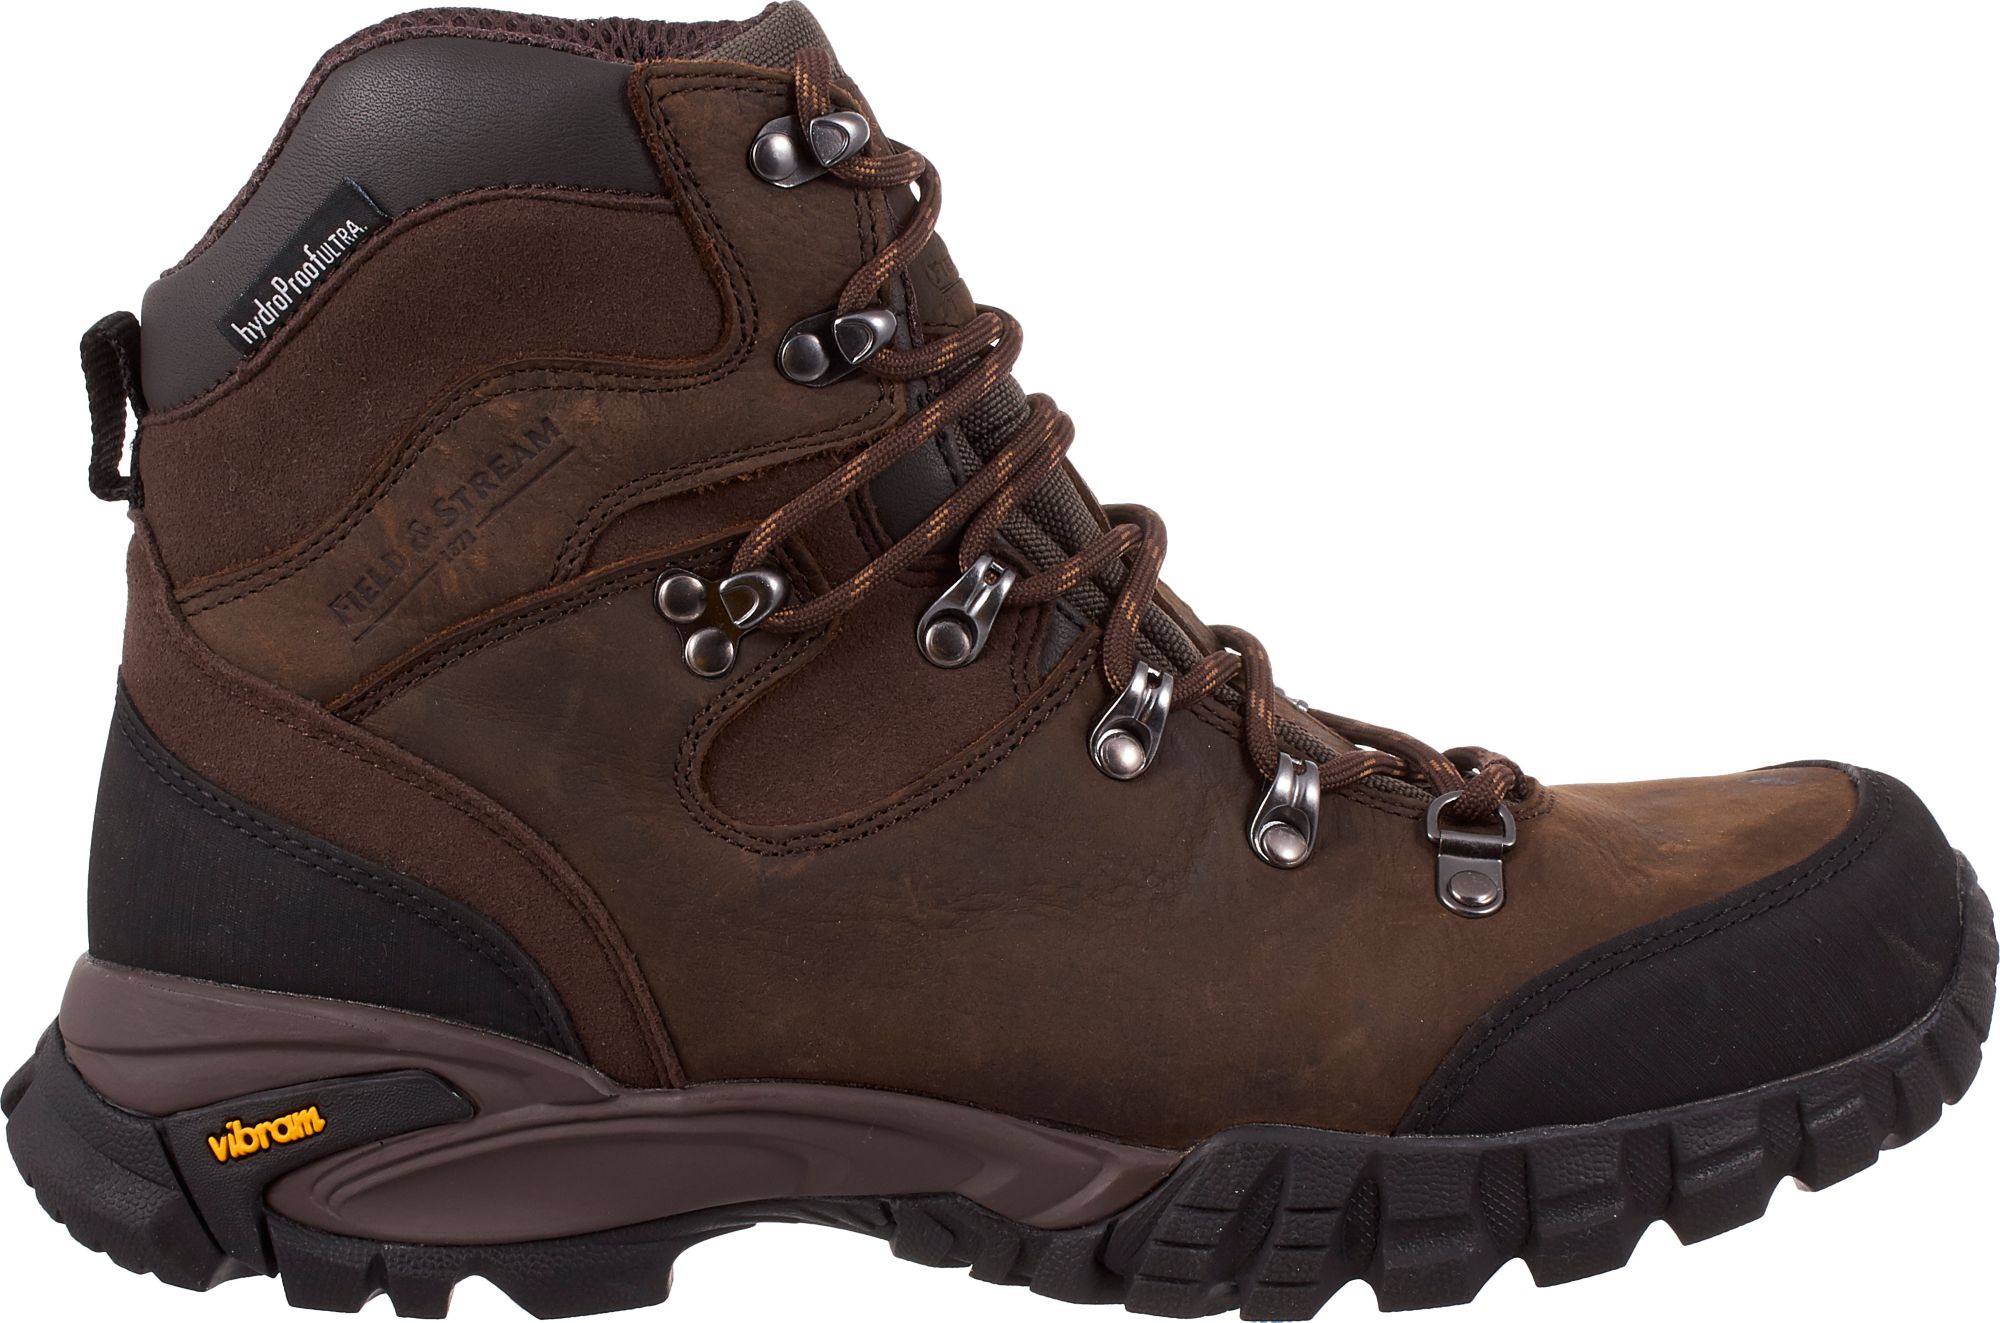 field and stream steel toe boots